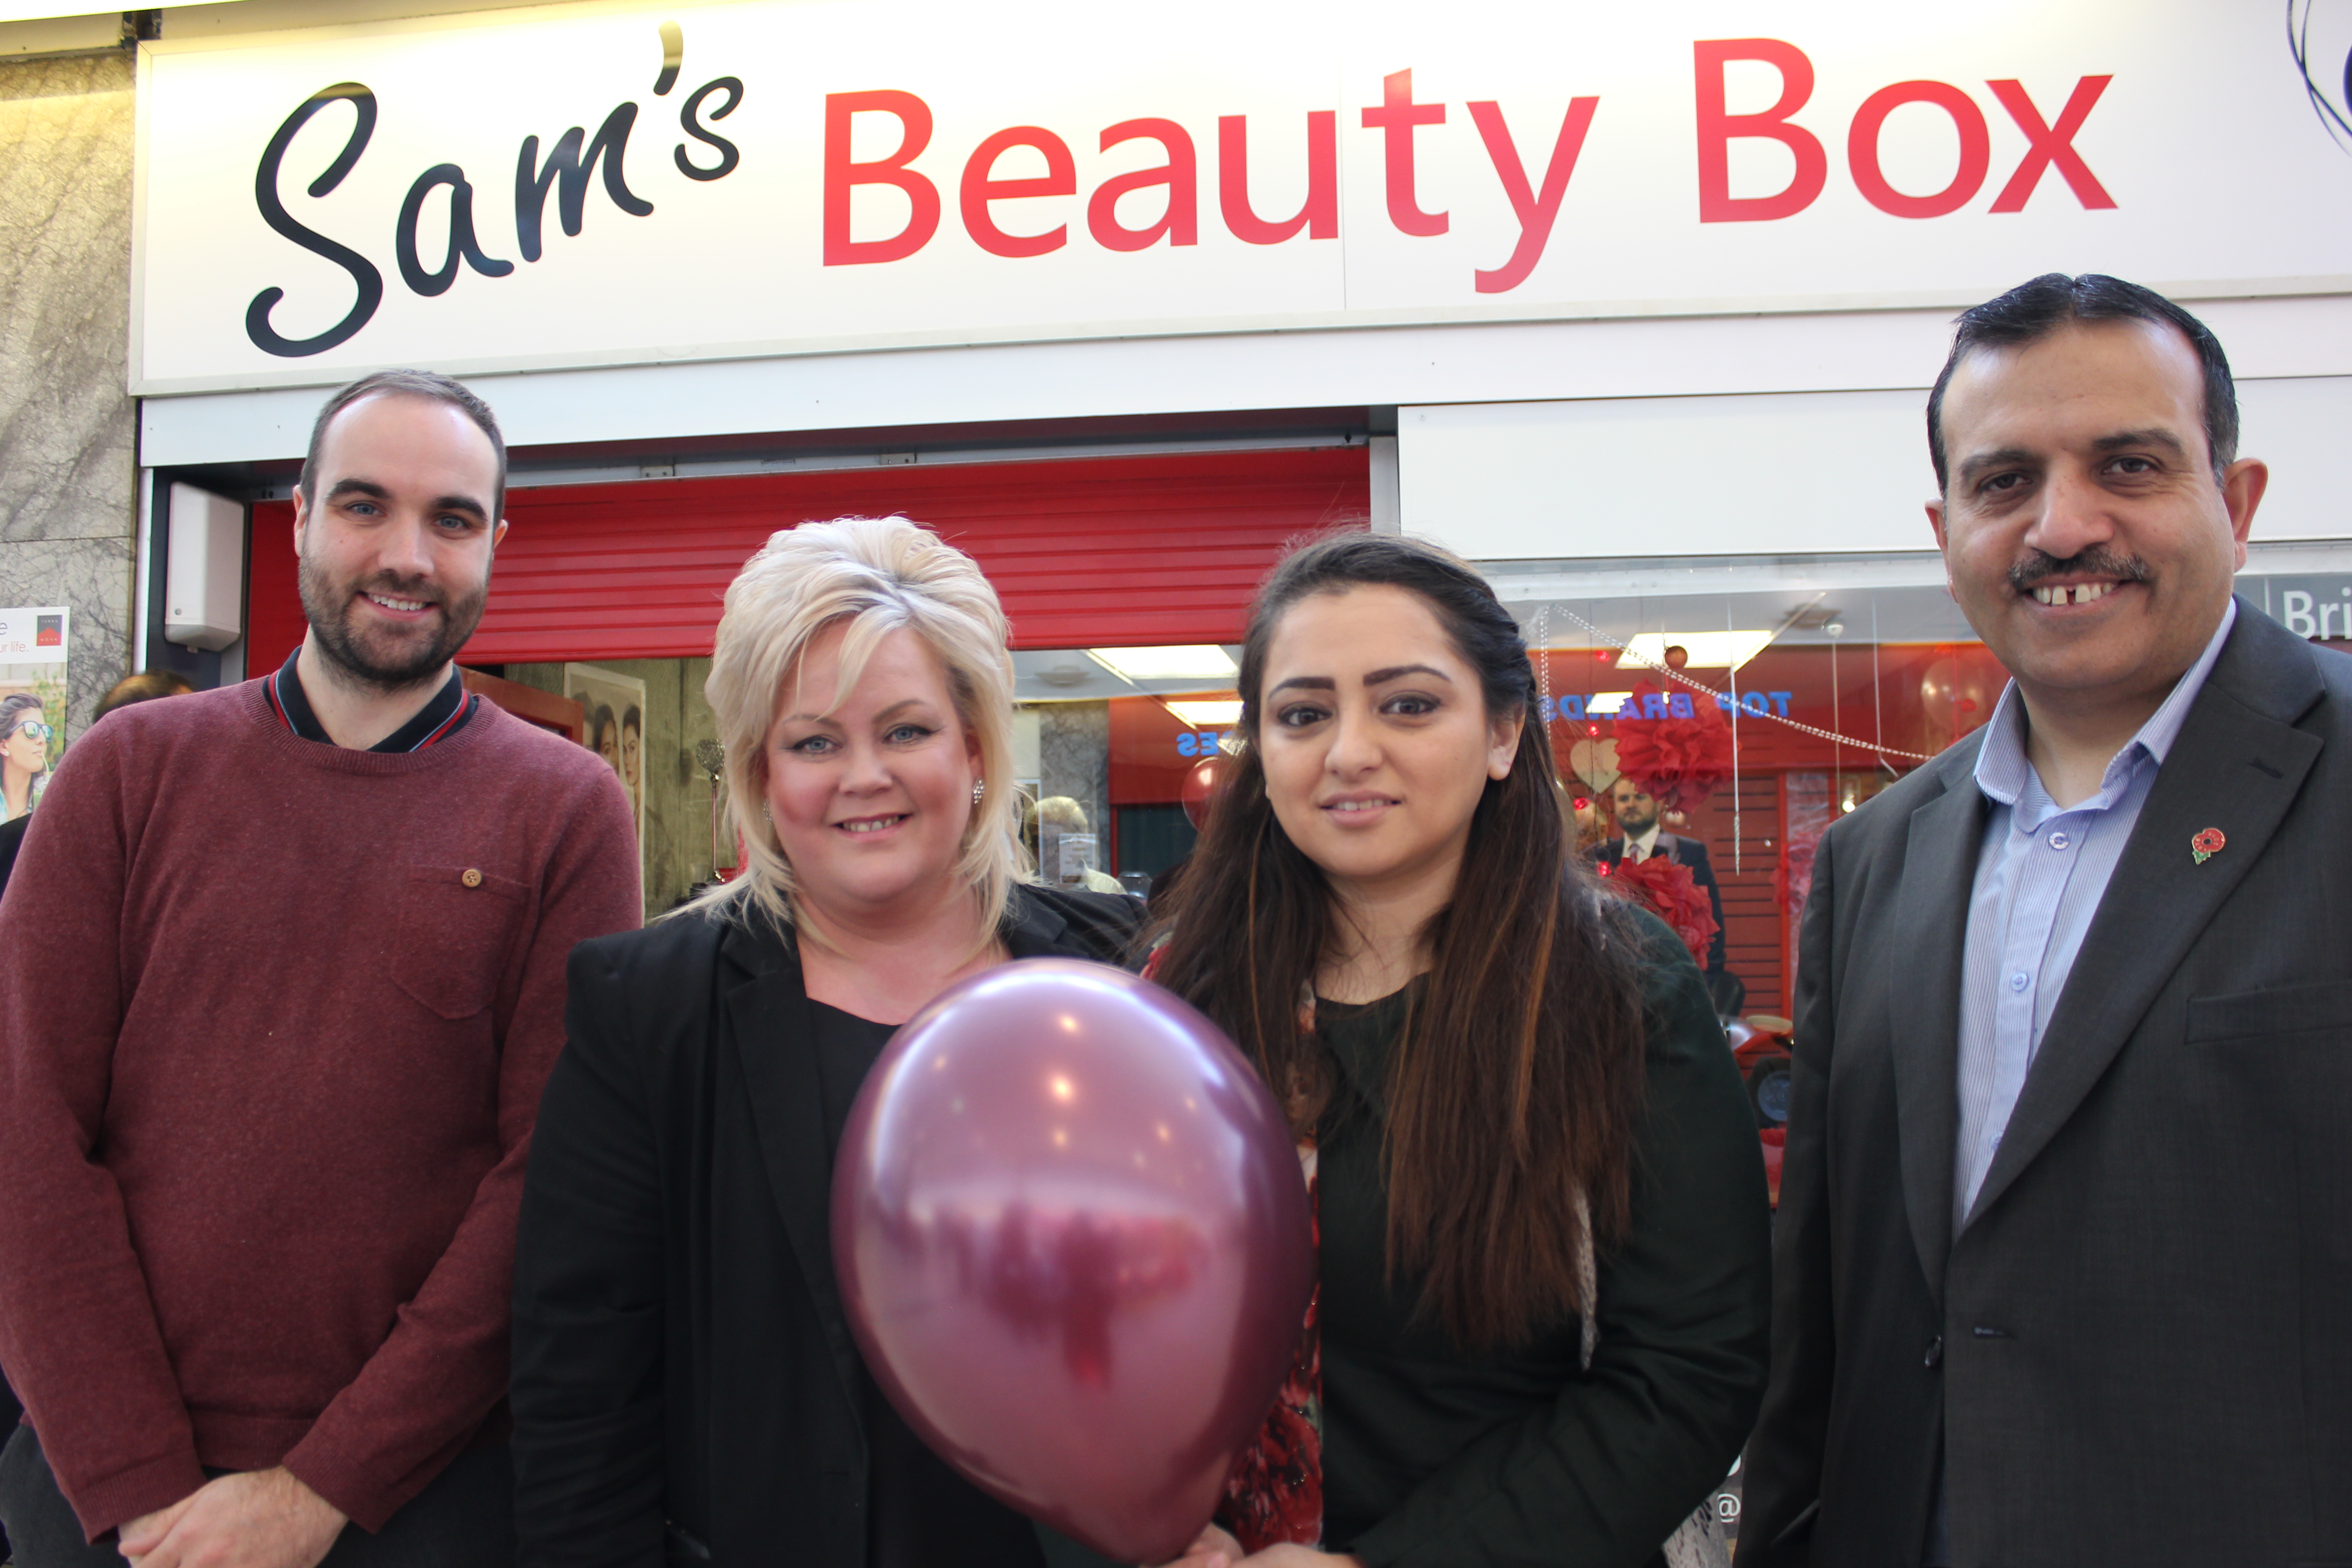 Sam’s Beauty Box triumphs in Pendle Rise  Win a Shop Competition